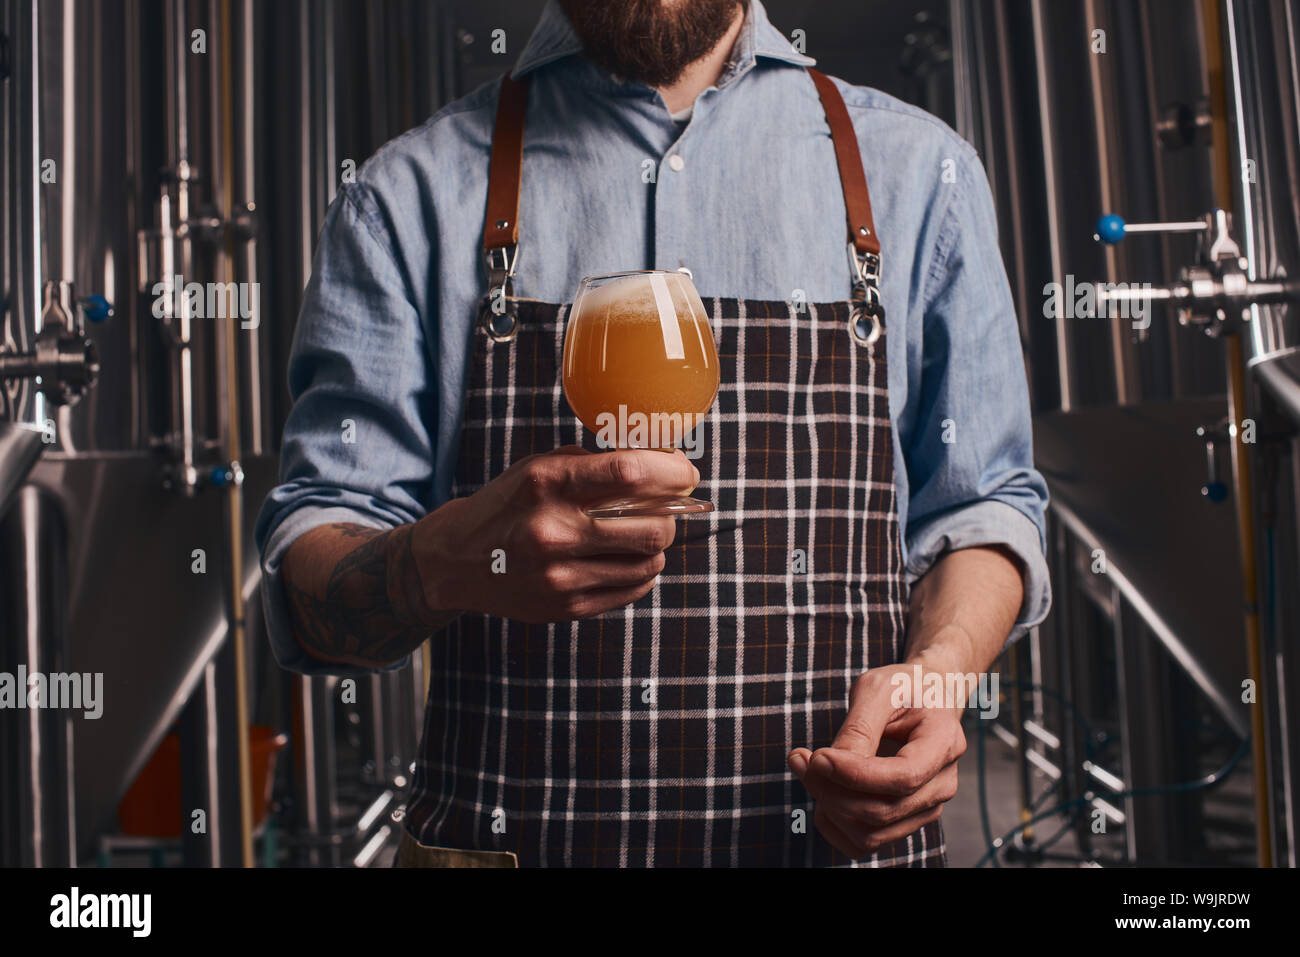 Bartender in the apron checks beer quality holding it in front of himself and looking at the color. Stock Photo